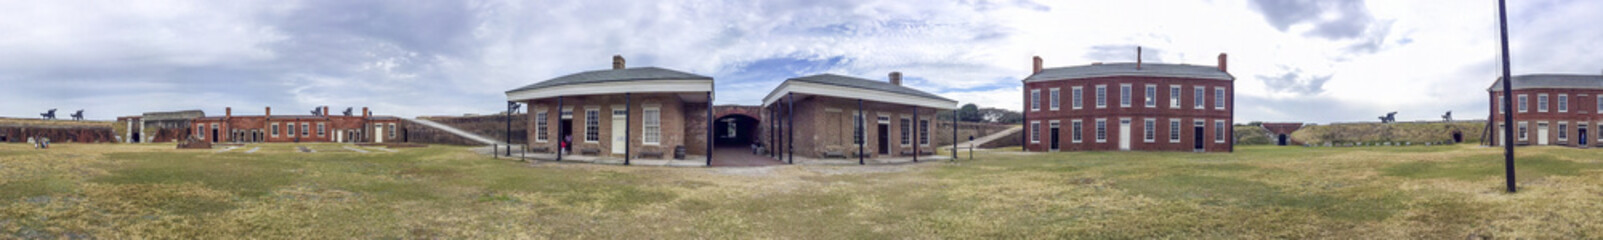 Fort Clinch State Park, Florida - USA